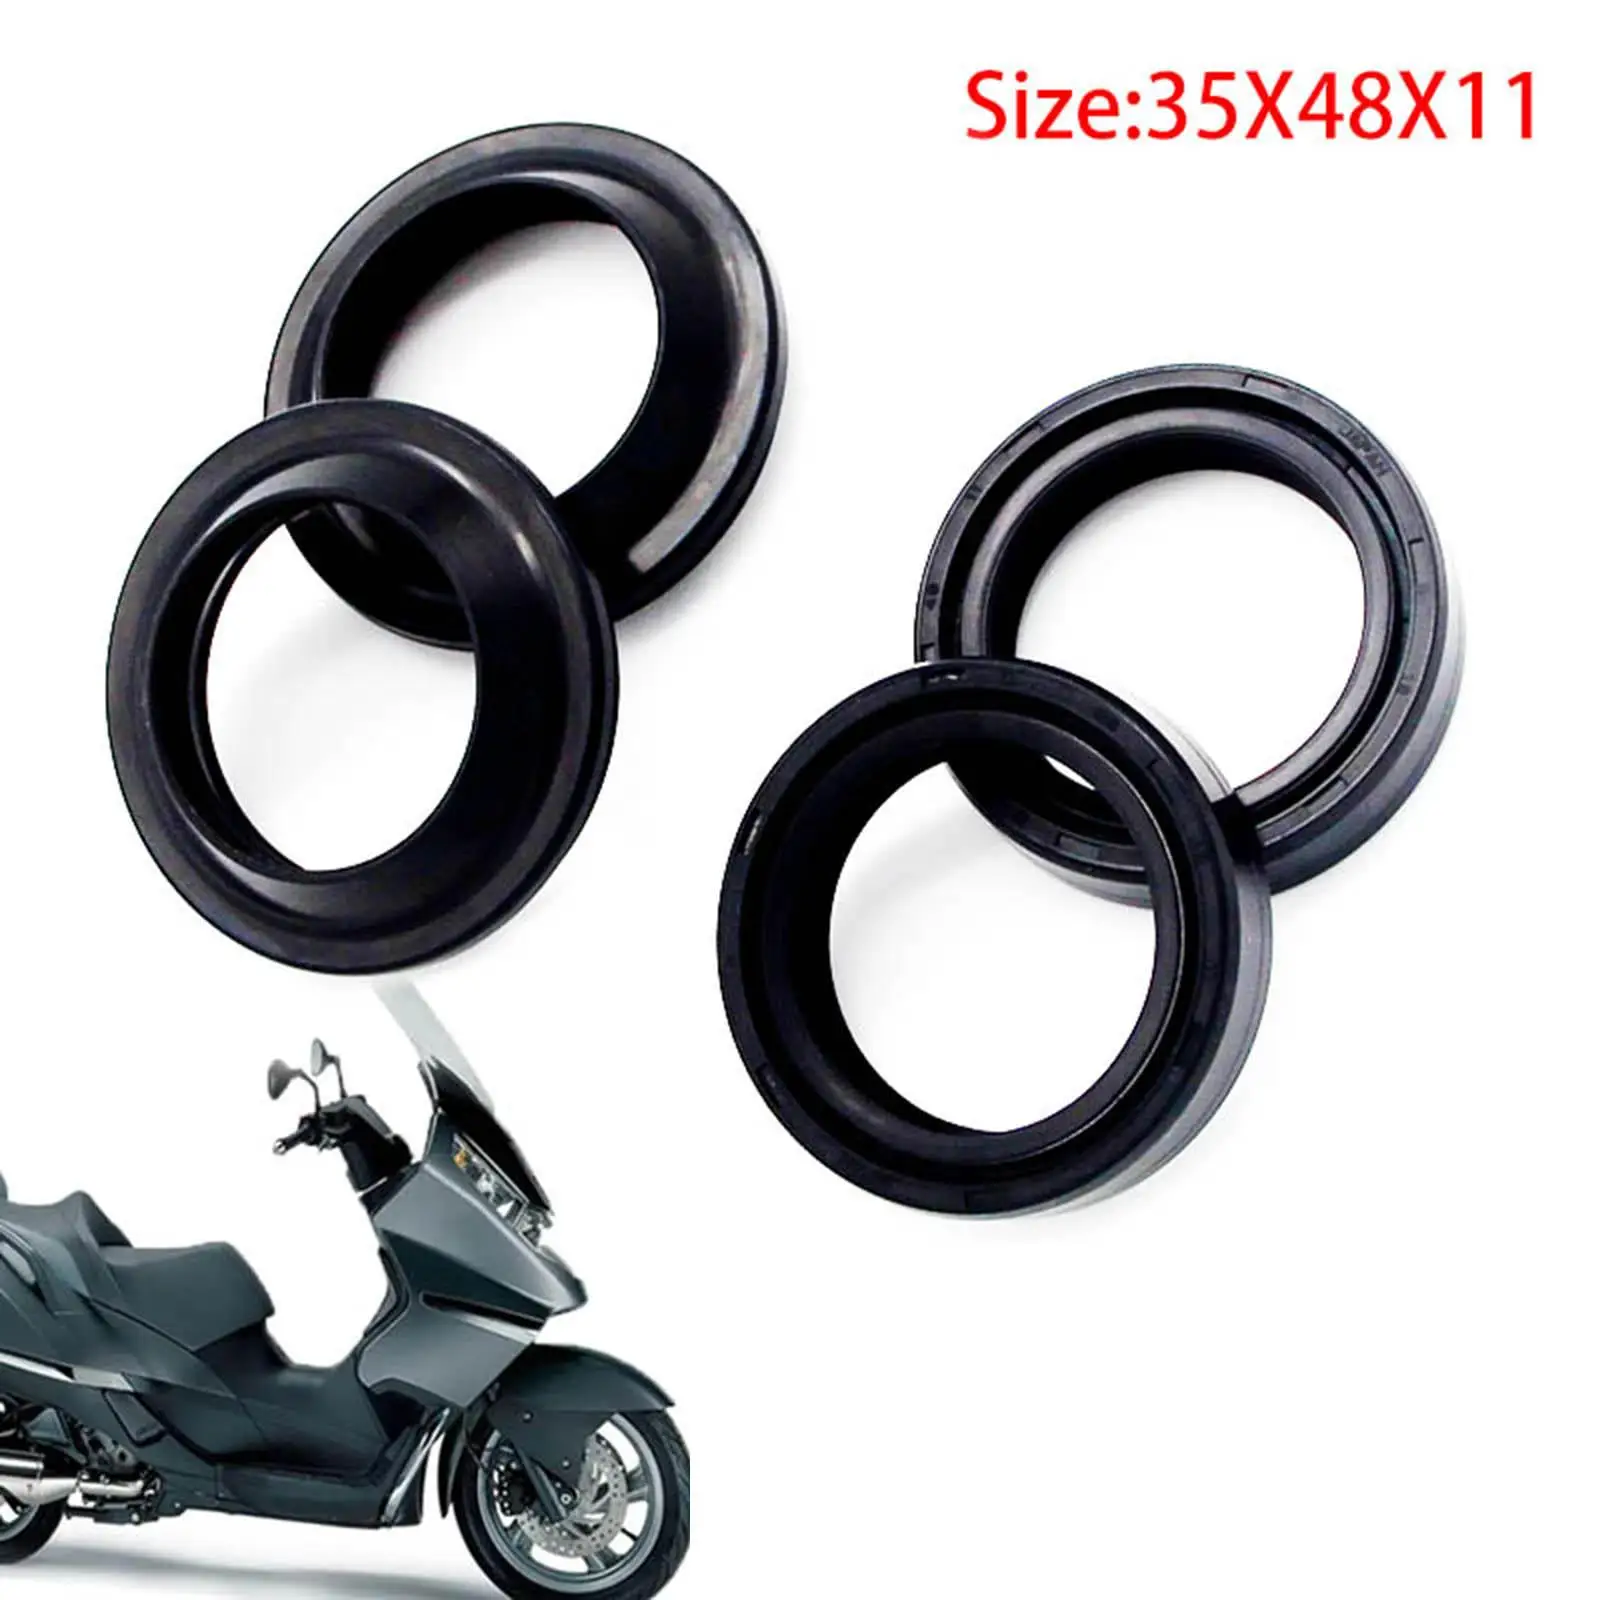 Motorcycle Front Fork Oil Seal and Dust Seal Kit 35x48x11mm for Honda